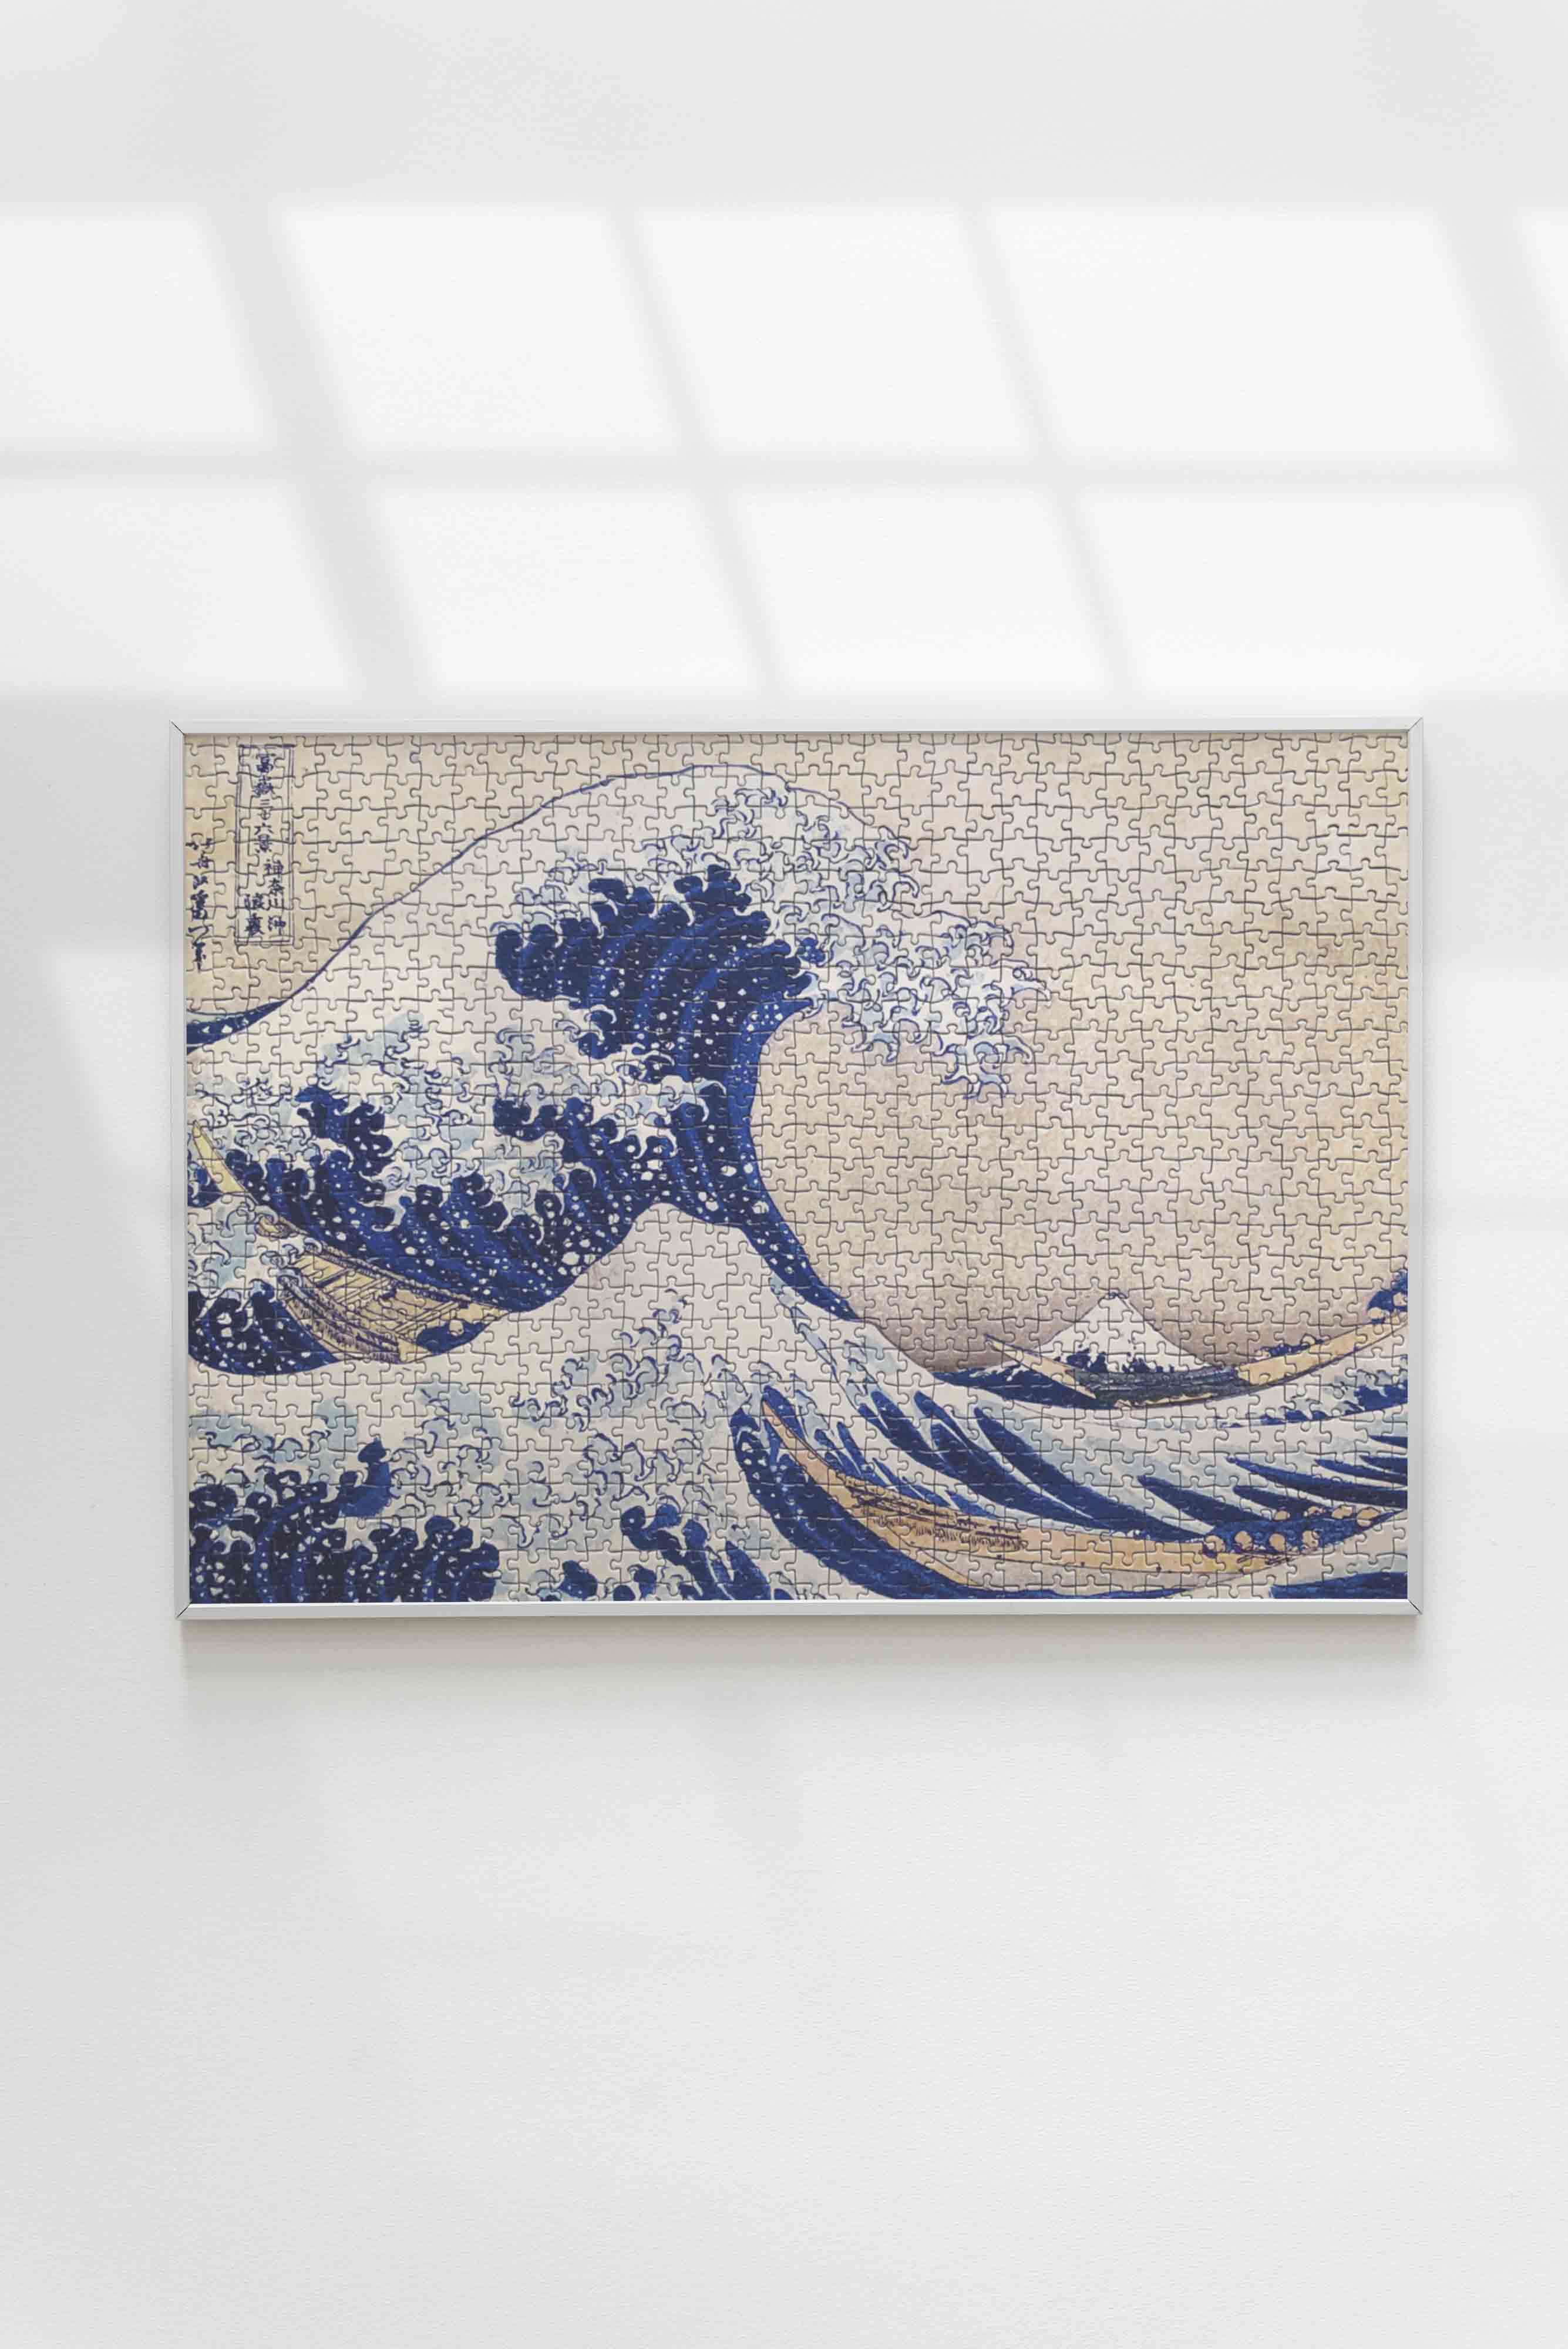 Katsushika Hokusai The Great Wave off Kanagawa Jigsaw Puzzle: 1000-Piece Puzzle Framed as Gallery Wall Art for Interior Design